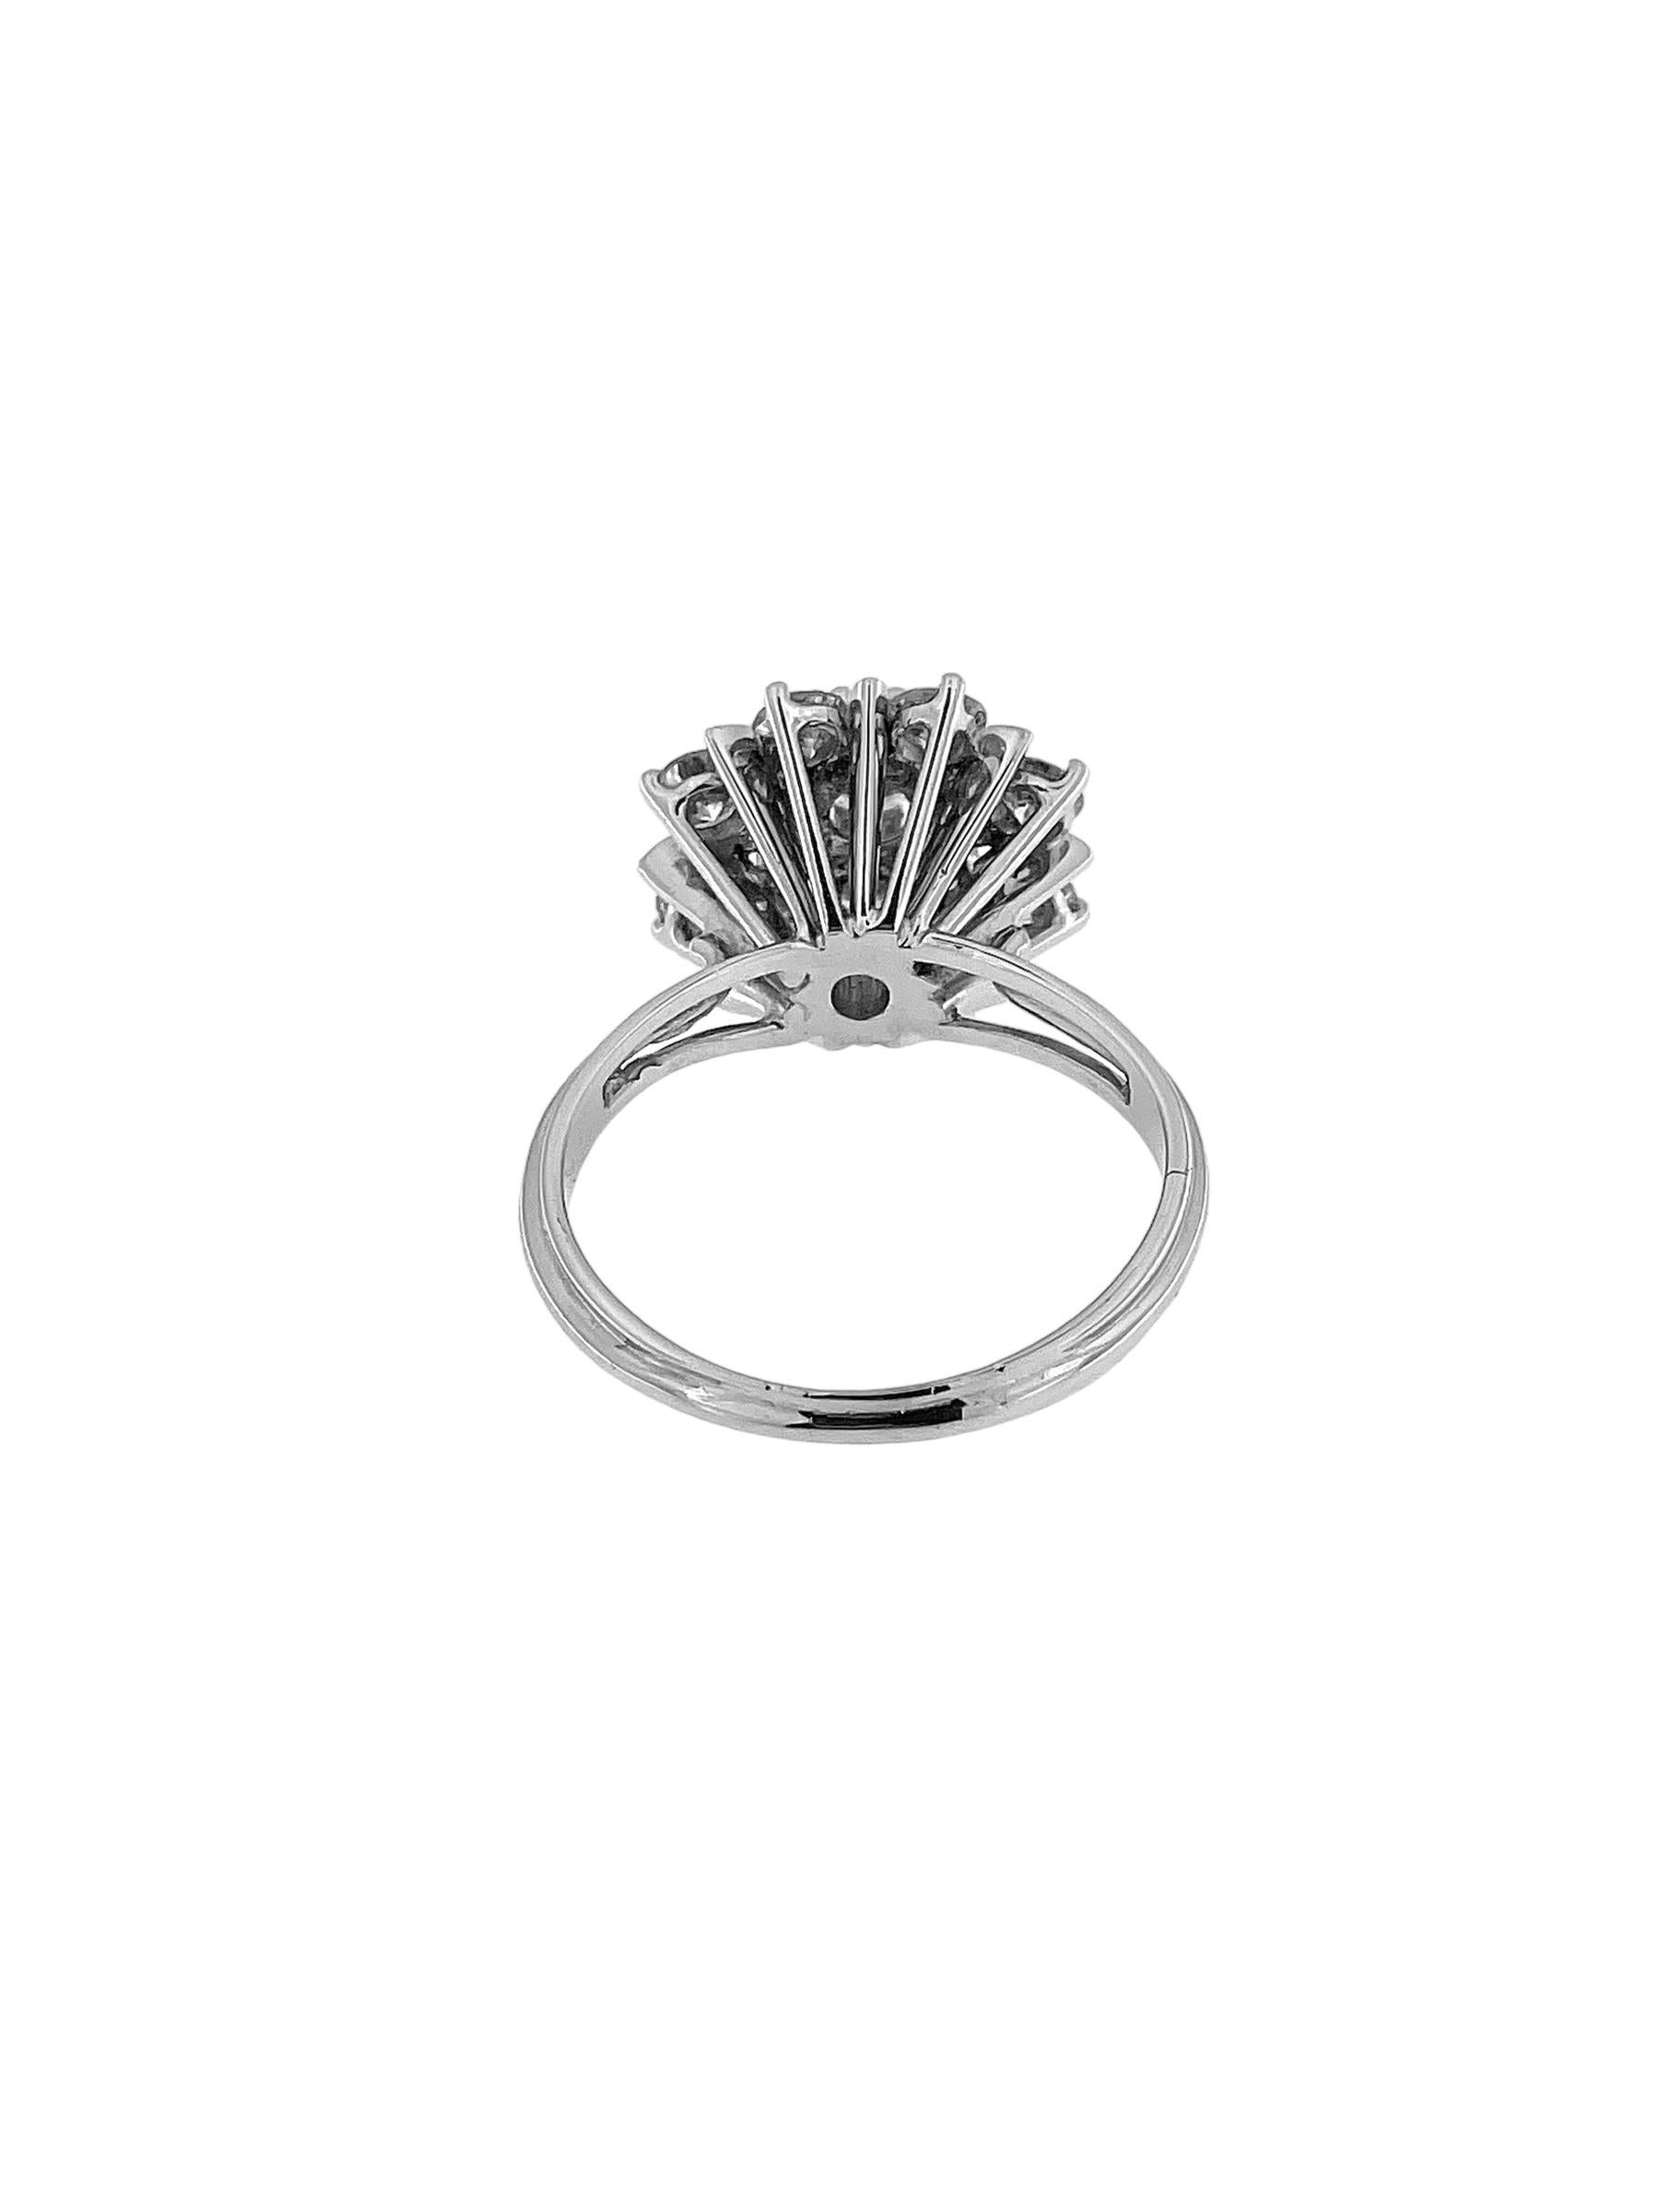 Women's HRD Certified Daisy Ring White Gold with Diamonds For Sale